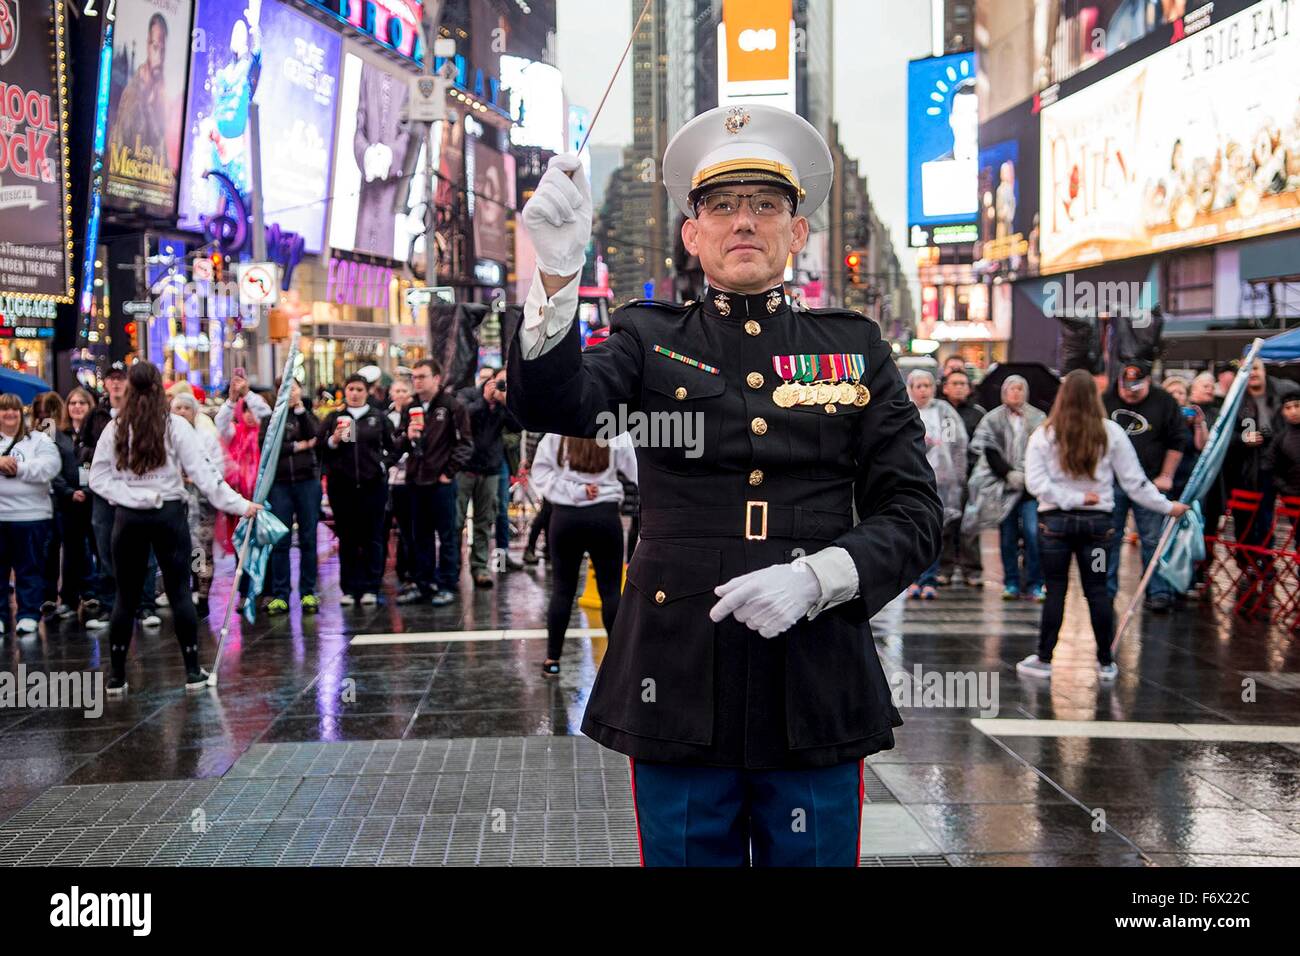 A U.S. Marine Corpsband director leads the Marine Corps Hymn to mark the Marine Corps birthday in Time Square during Veterans Week November 9, 2015 in New York City, NY. Stock Photo